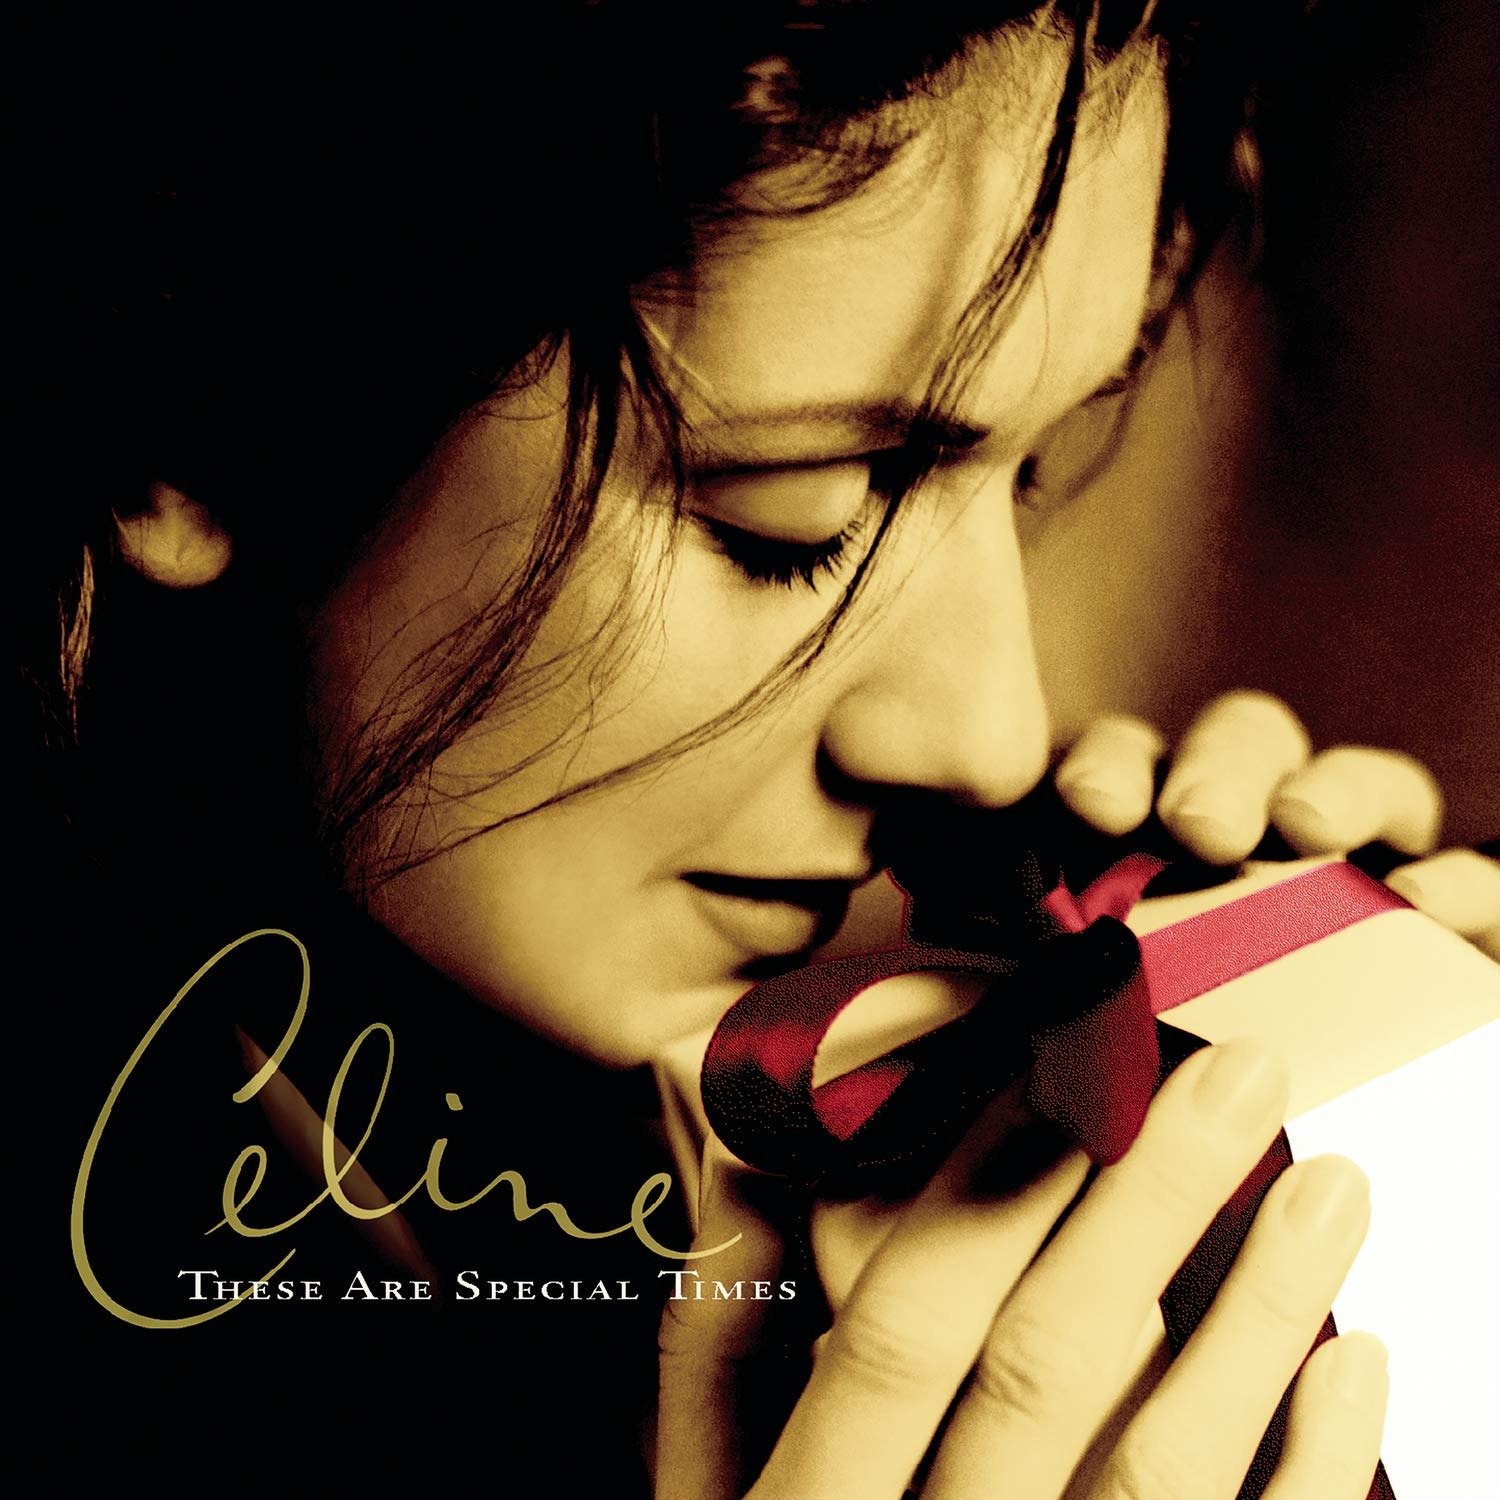 CD Shop - DION, CELINE THESE ARE SPECIAL TIMES / REVISED TRACKLIST -REISSUE-